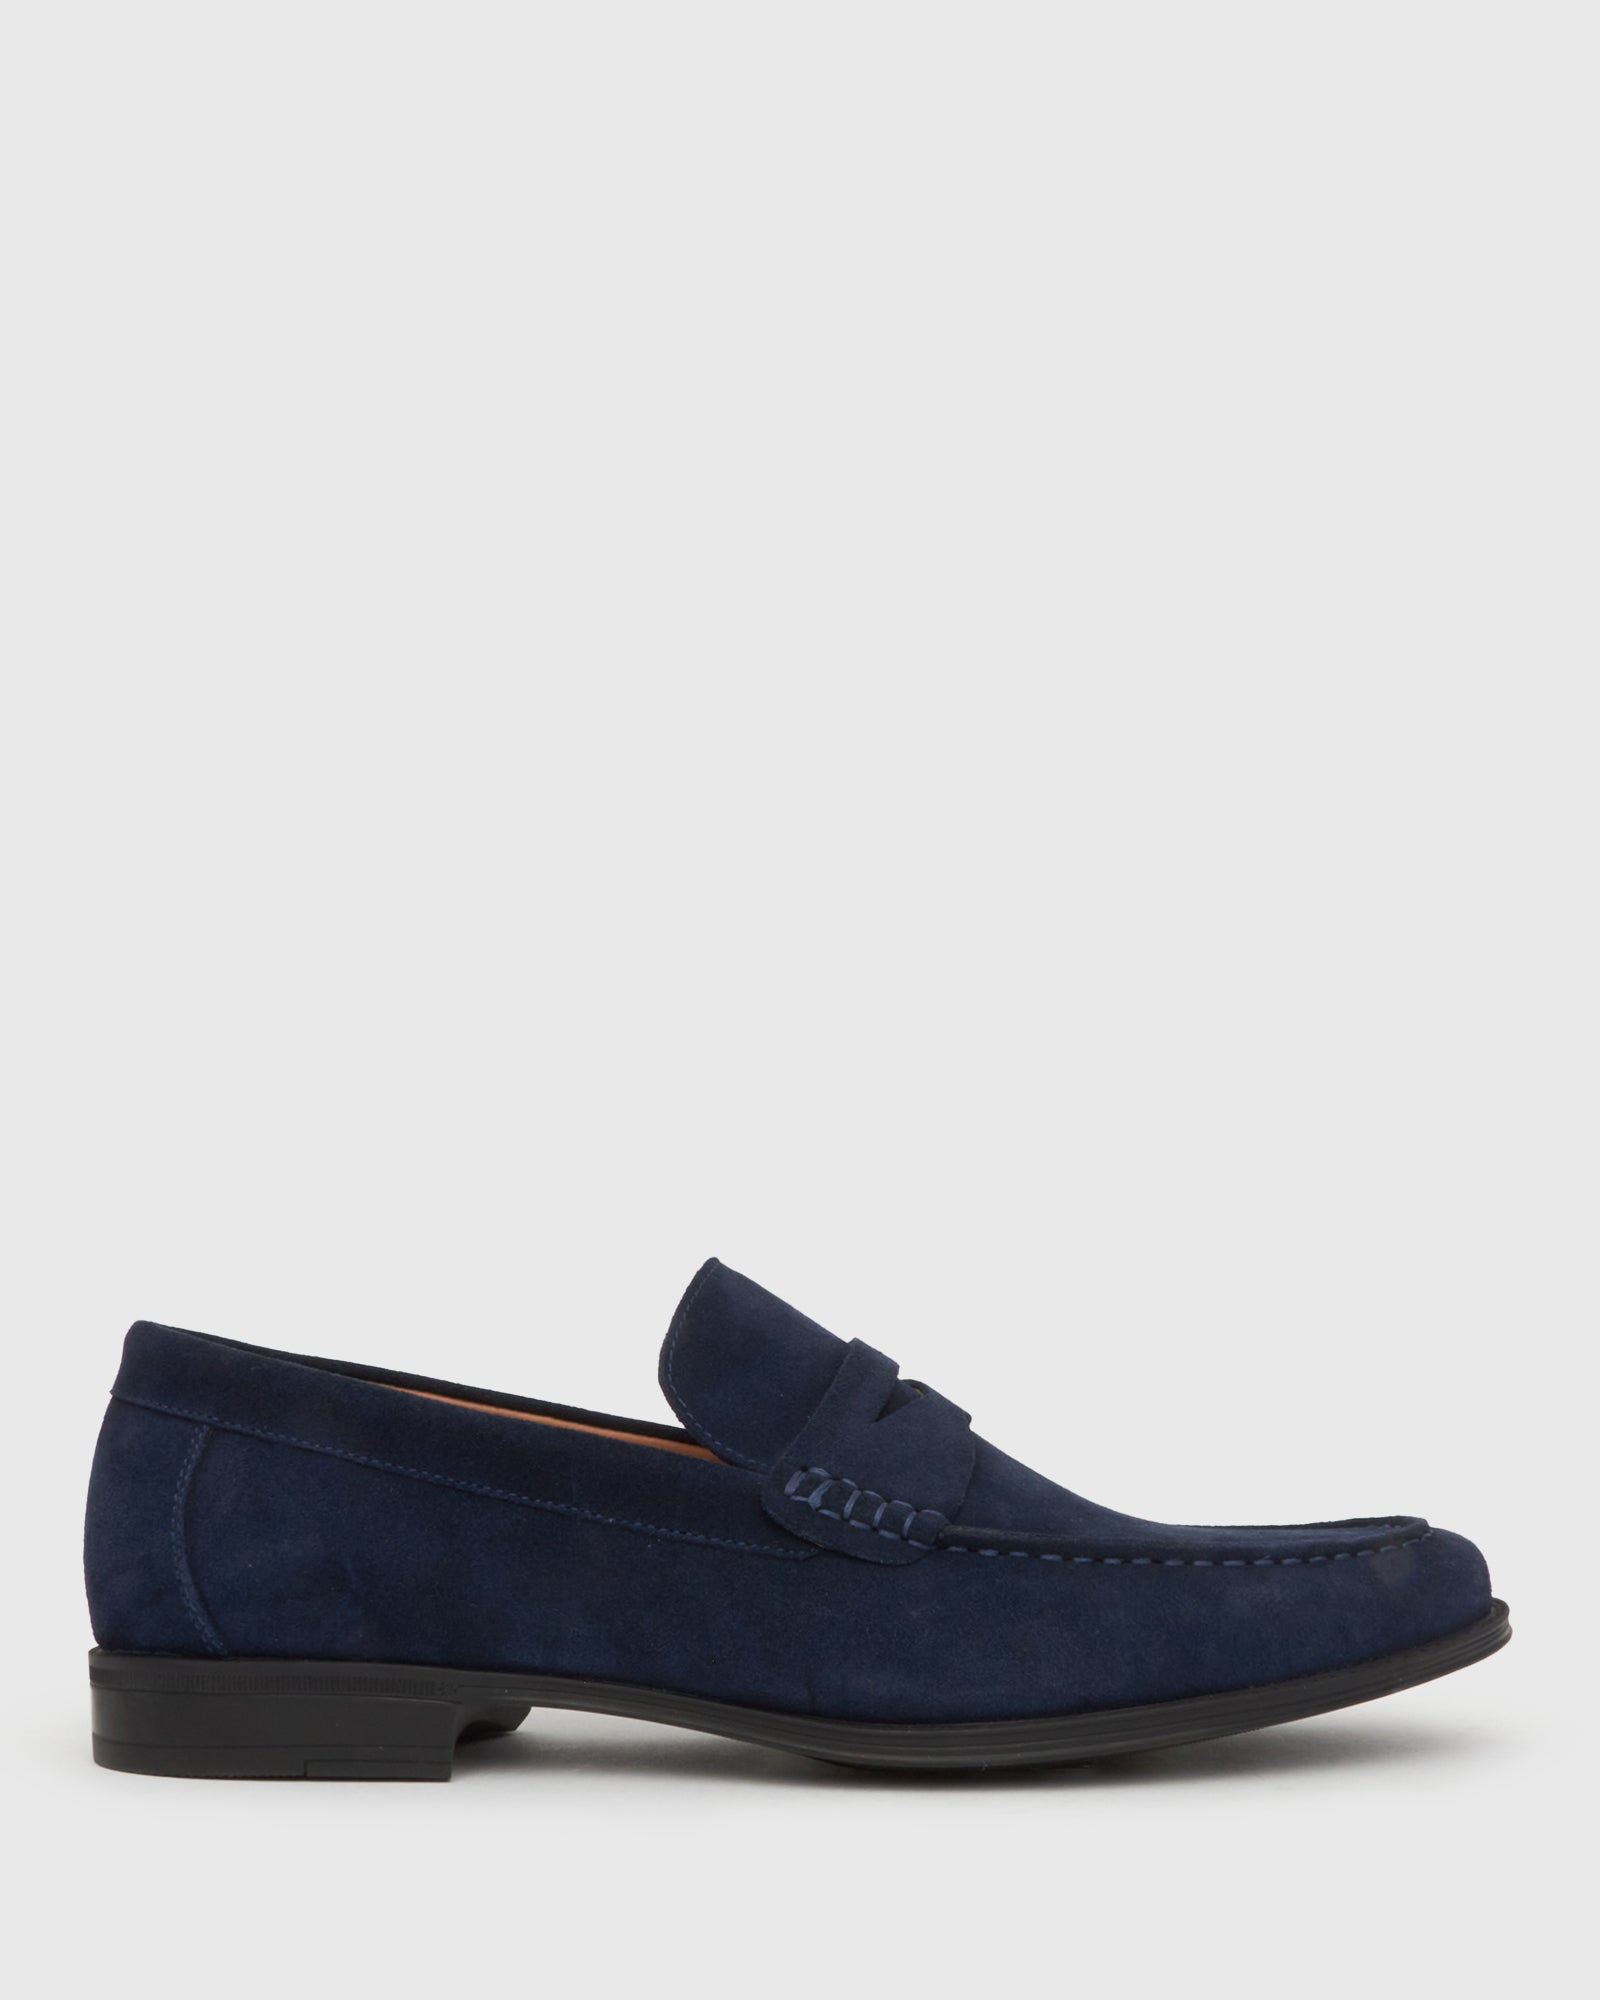 Buy STEPHAN Suede Round Toe Loafers by Dakota online - Betts